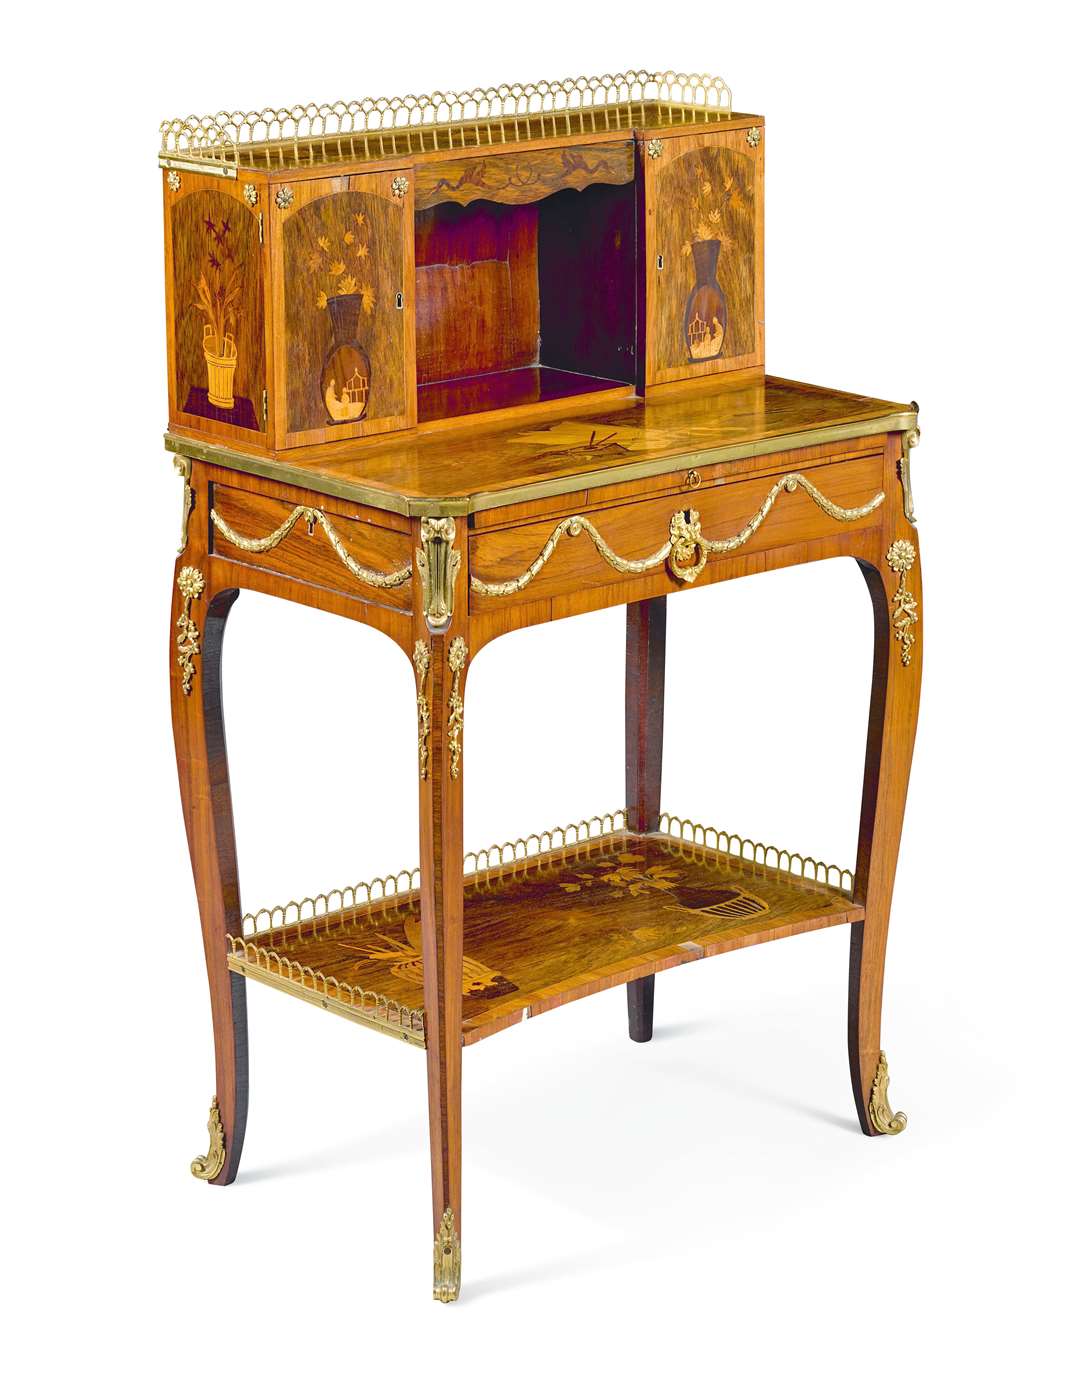 A Louis XVI Marquetry writing desk made of kingwood and rosewood, in the manner of Charles Topino (est. £2,000-3,000)